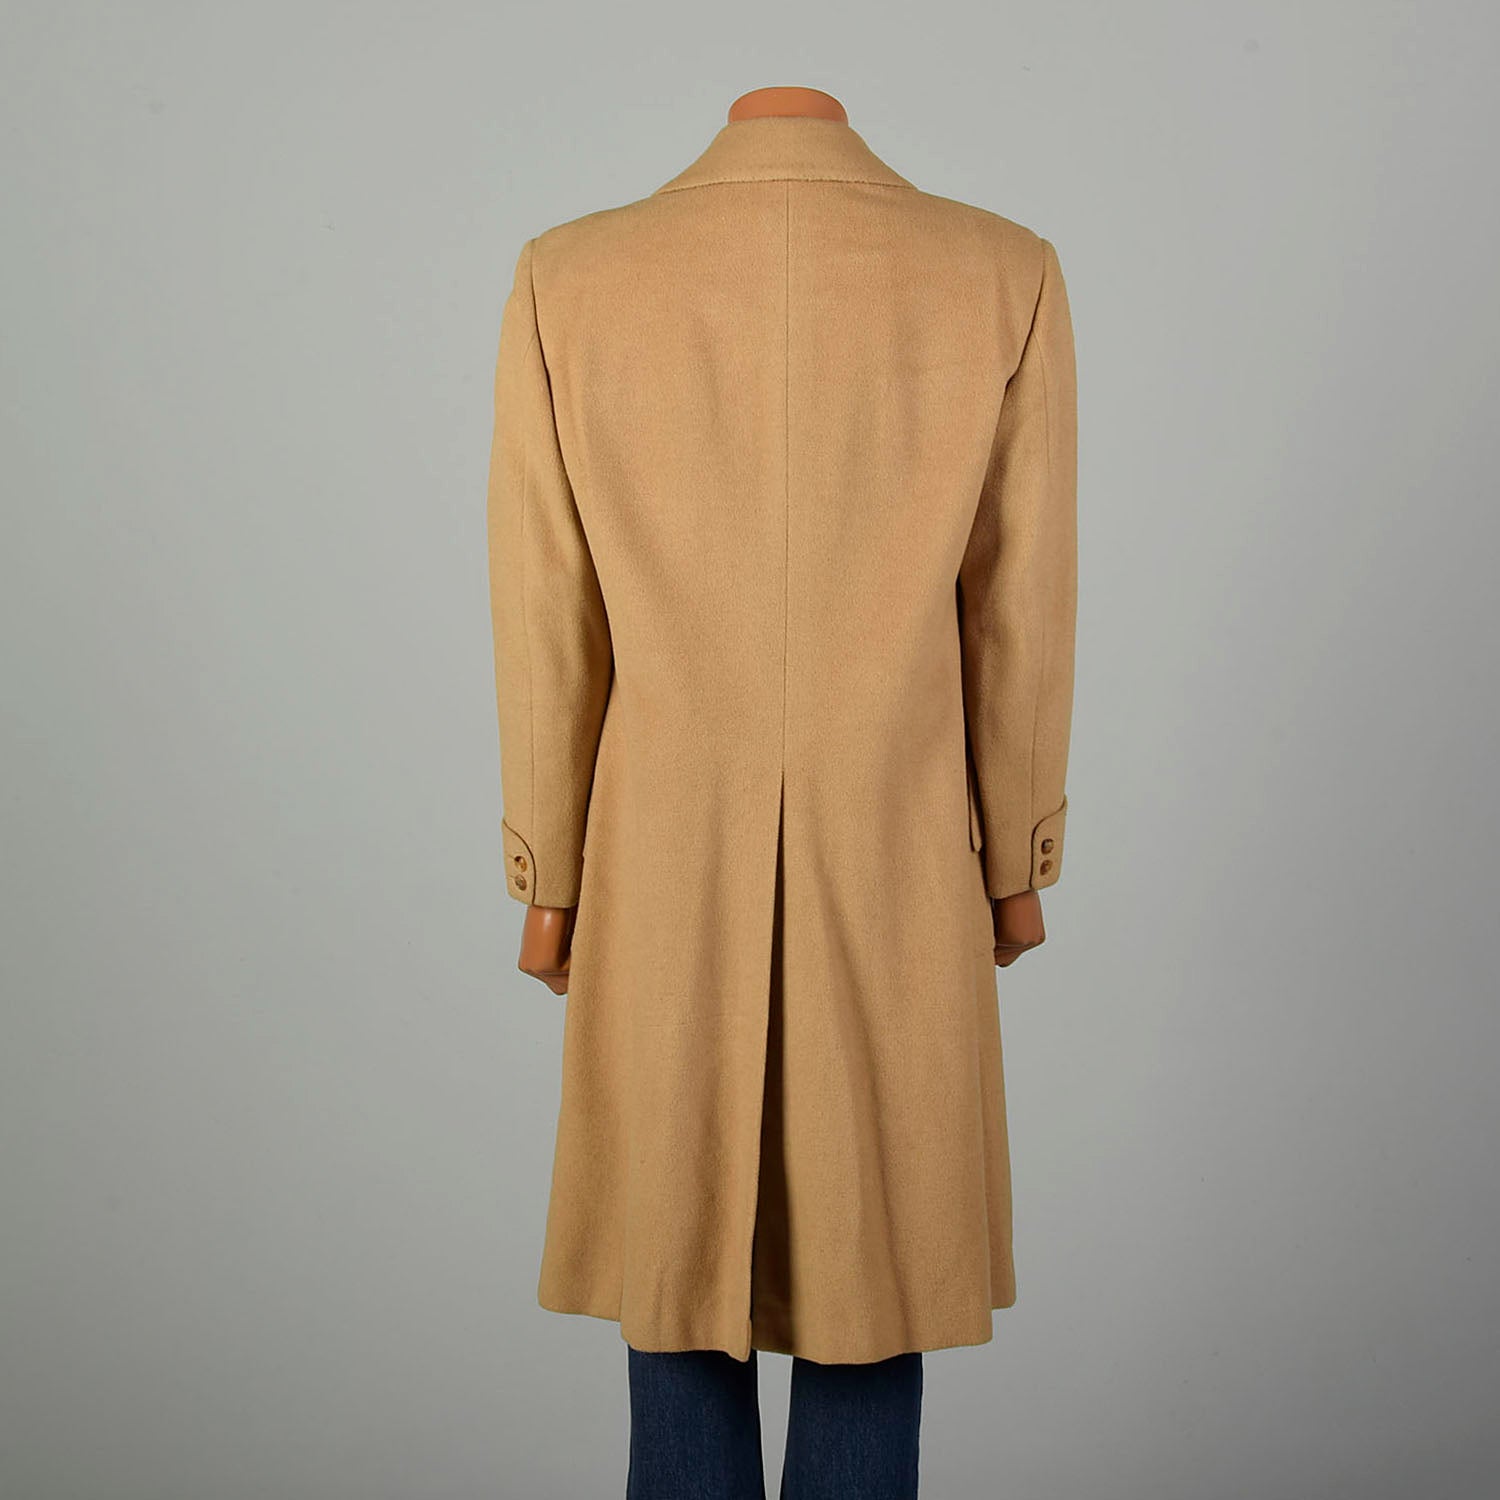 Large 1970s Coat Double Breasted Tan Winter Overcoat